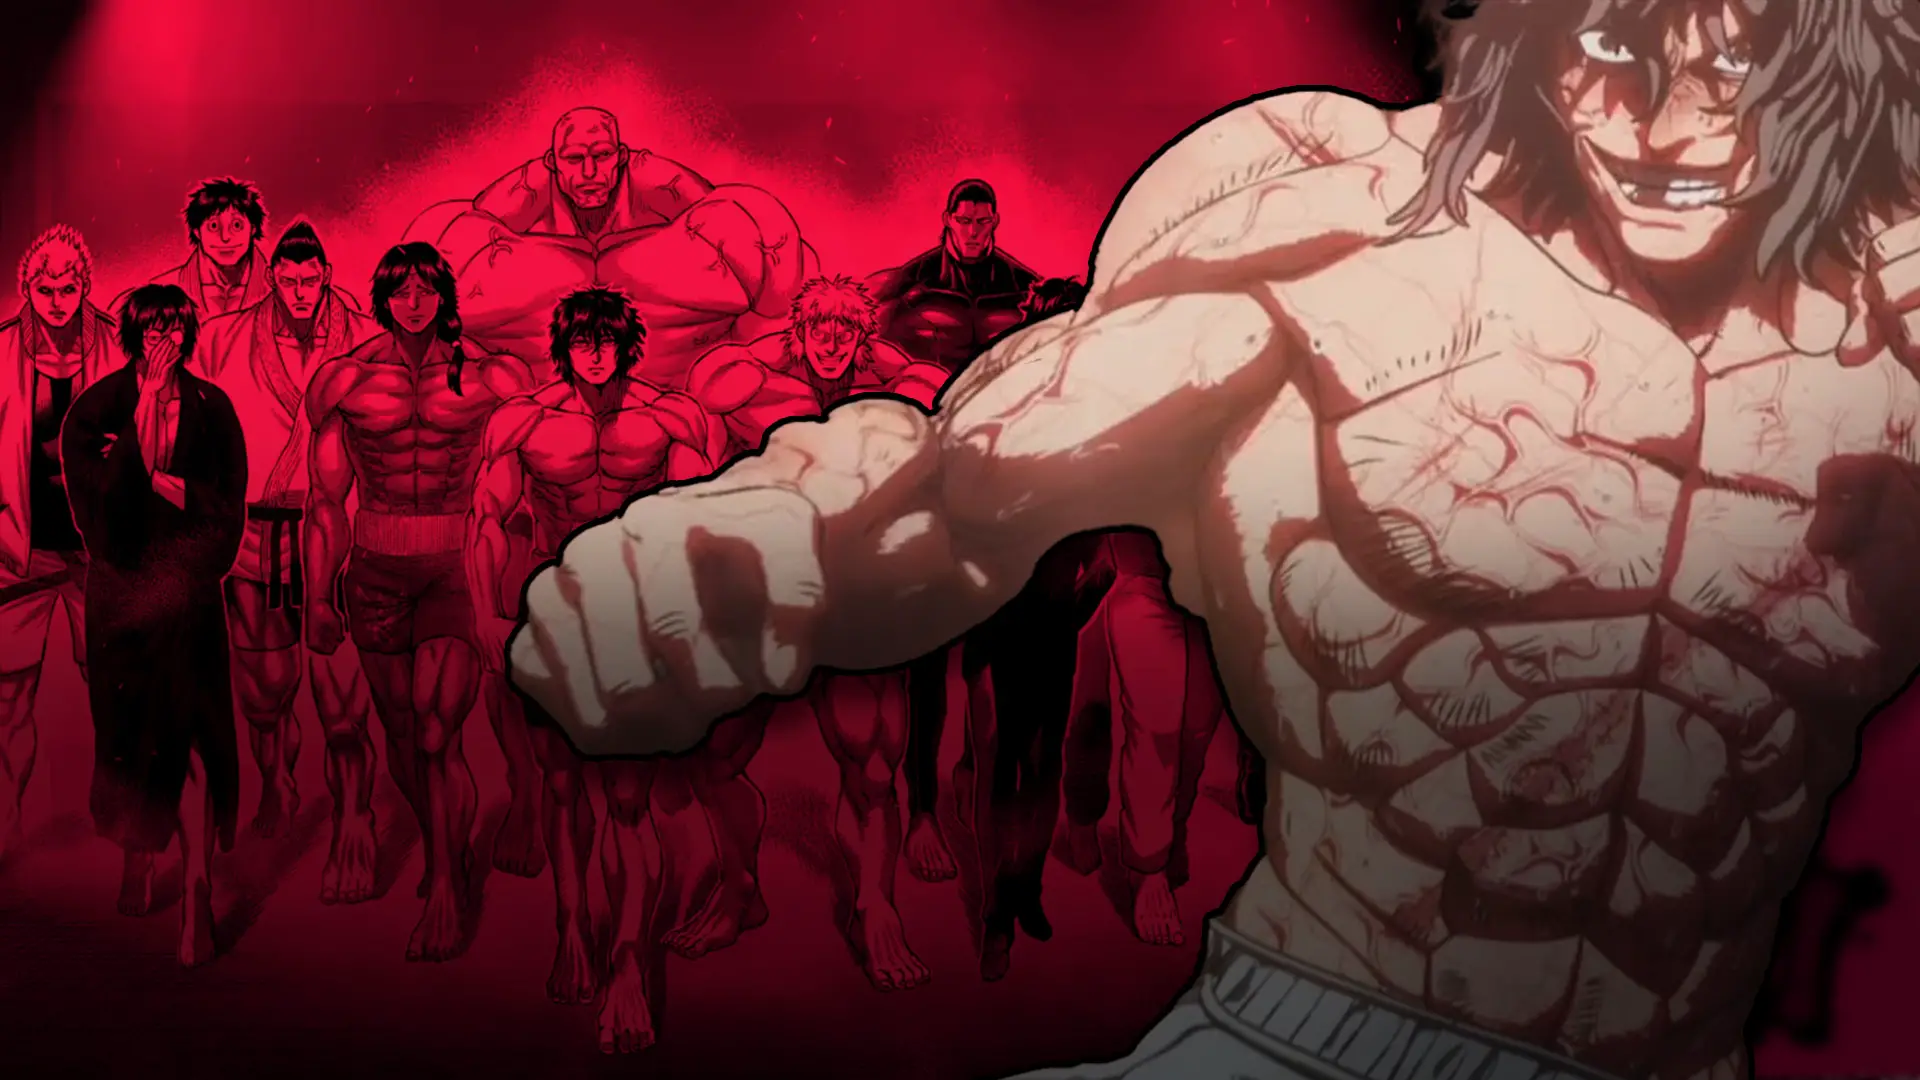 Kengan Ashura Wrap-Up: Why There's No Season 3 and What Fans Can Expect Next